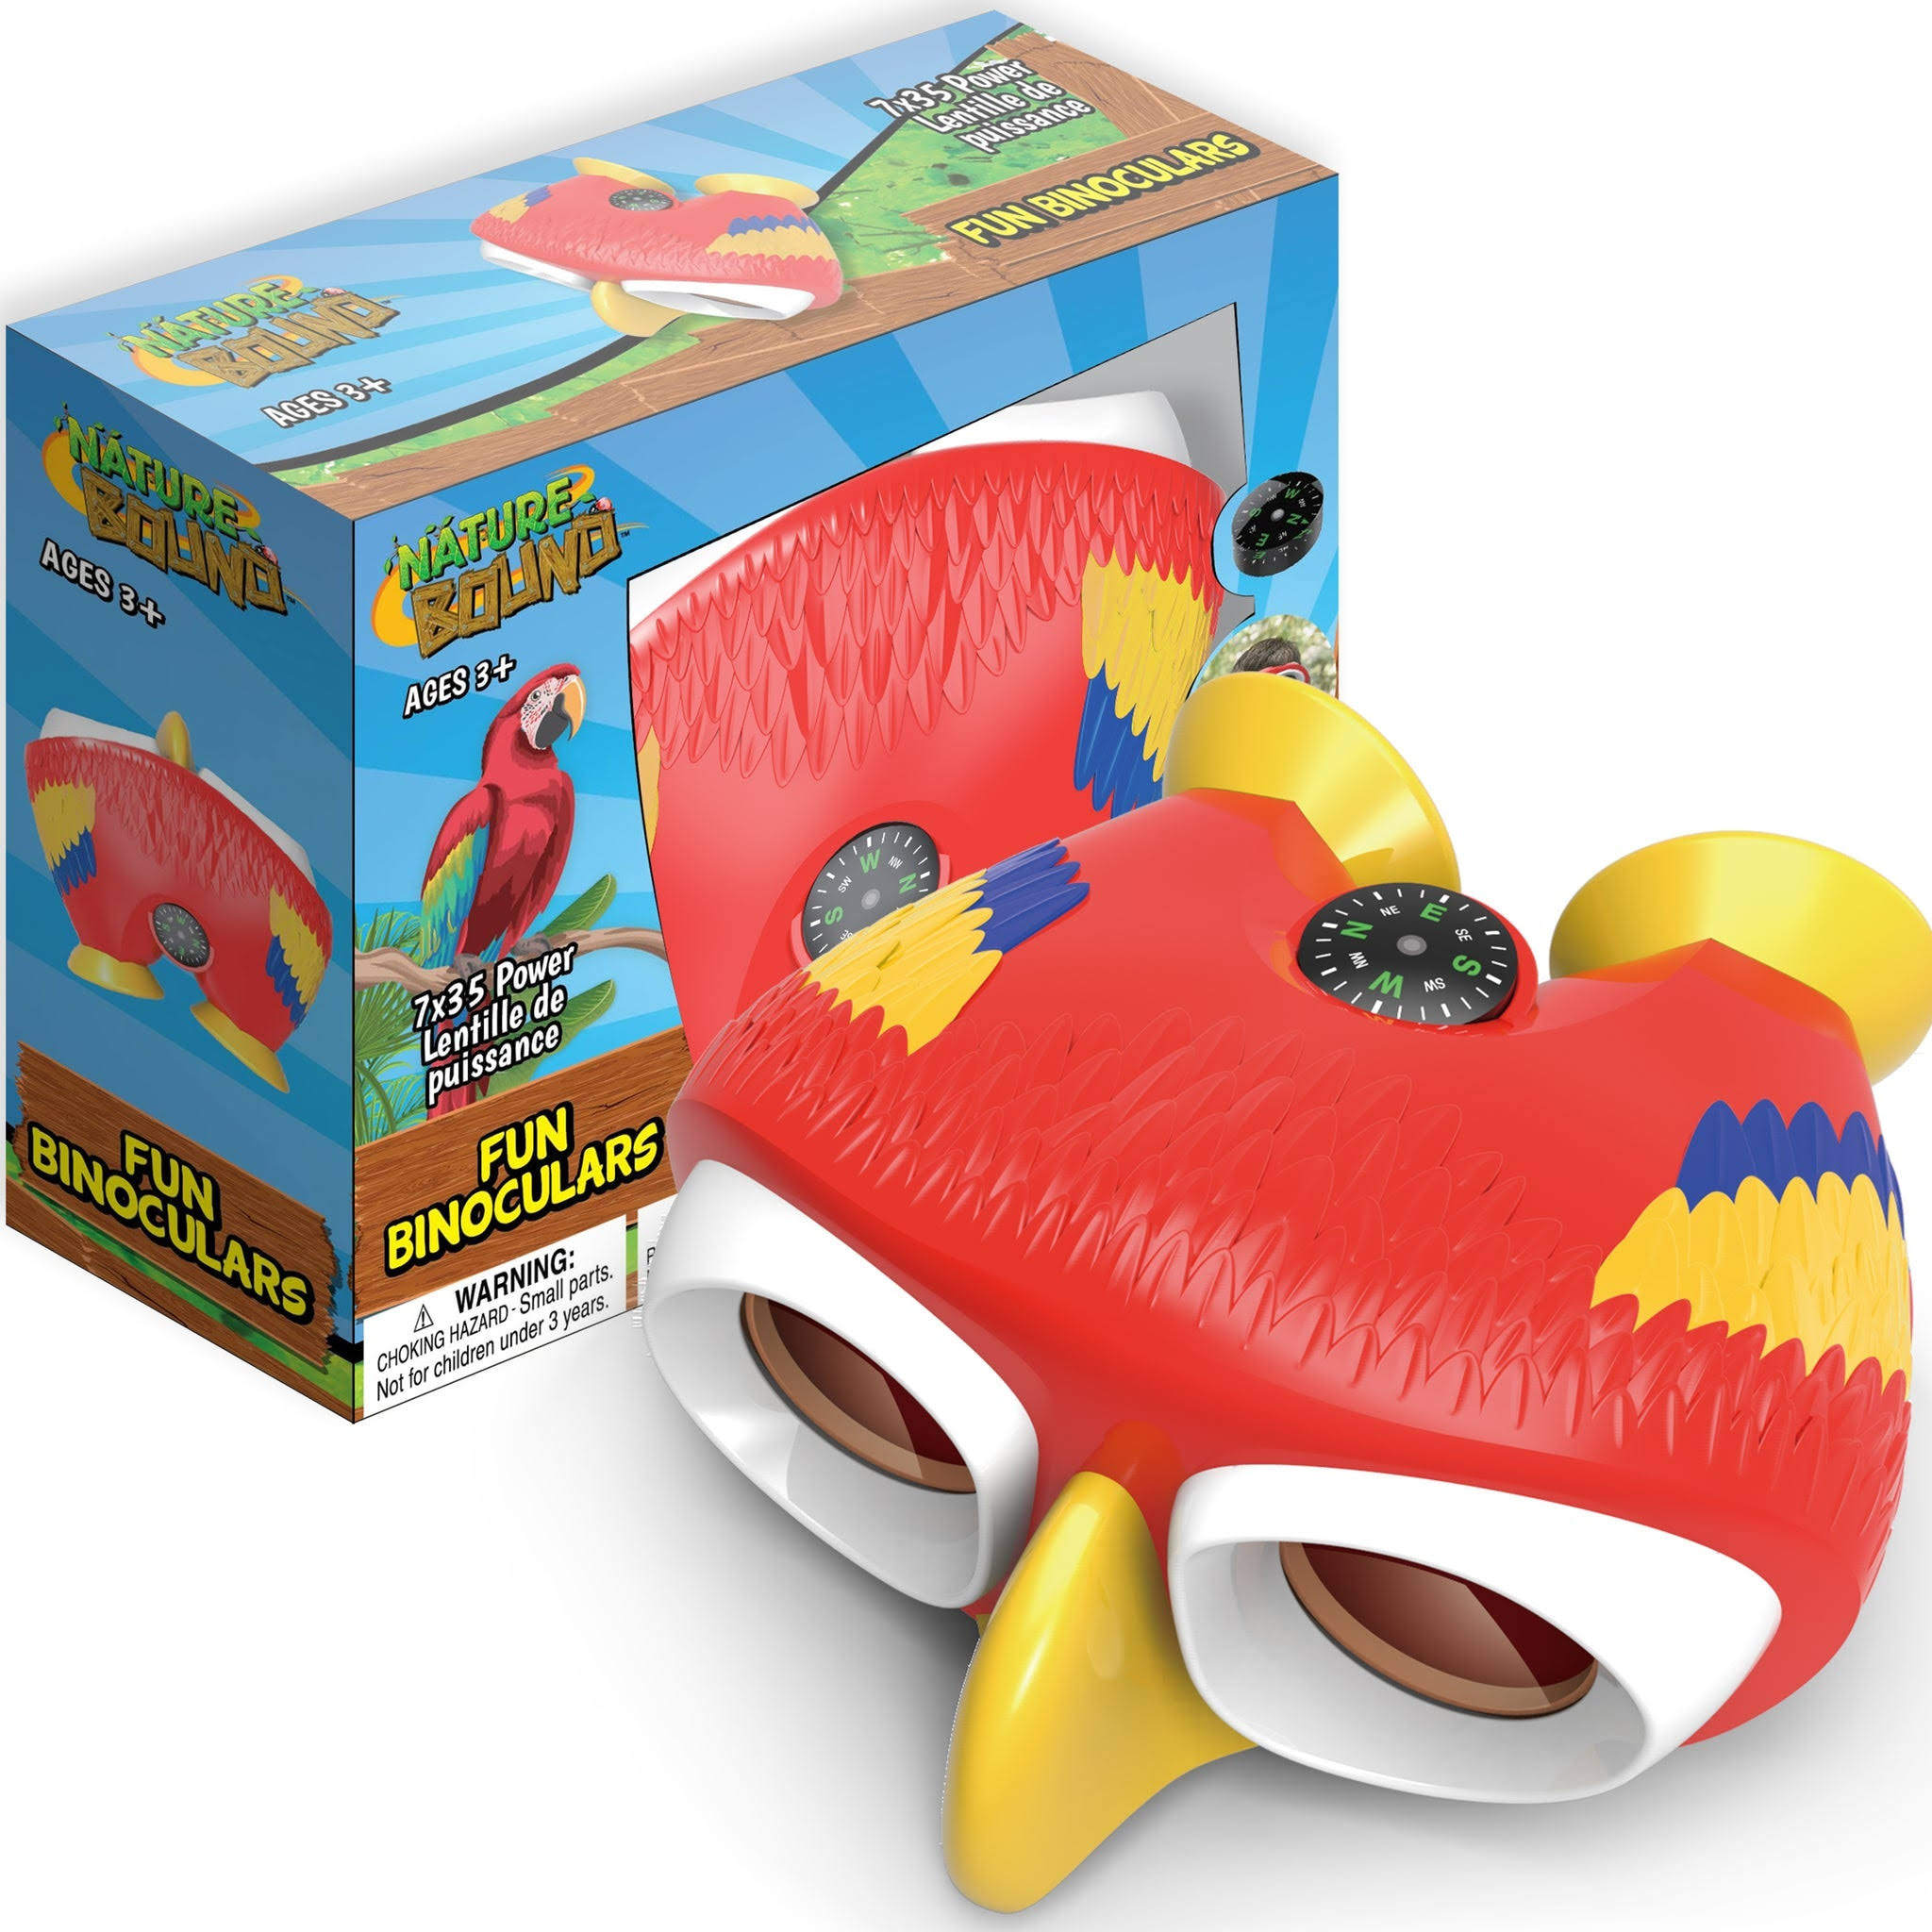 Nature Bound - Binoculars for Toddlers & Kids, Explore Nature and Outdoors Play with Fun Parrot Shaped Design & Compass, Boys & Girls, Red